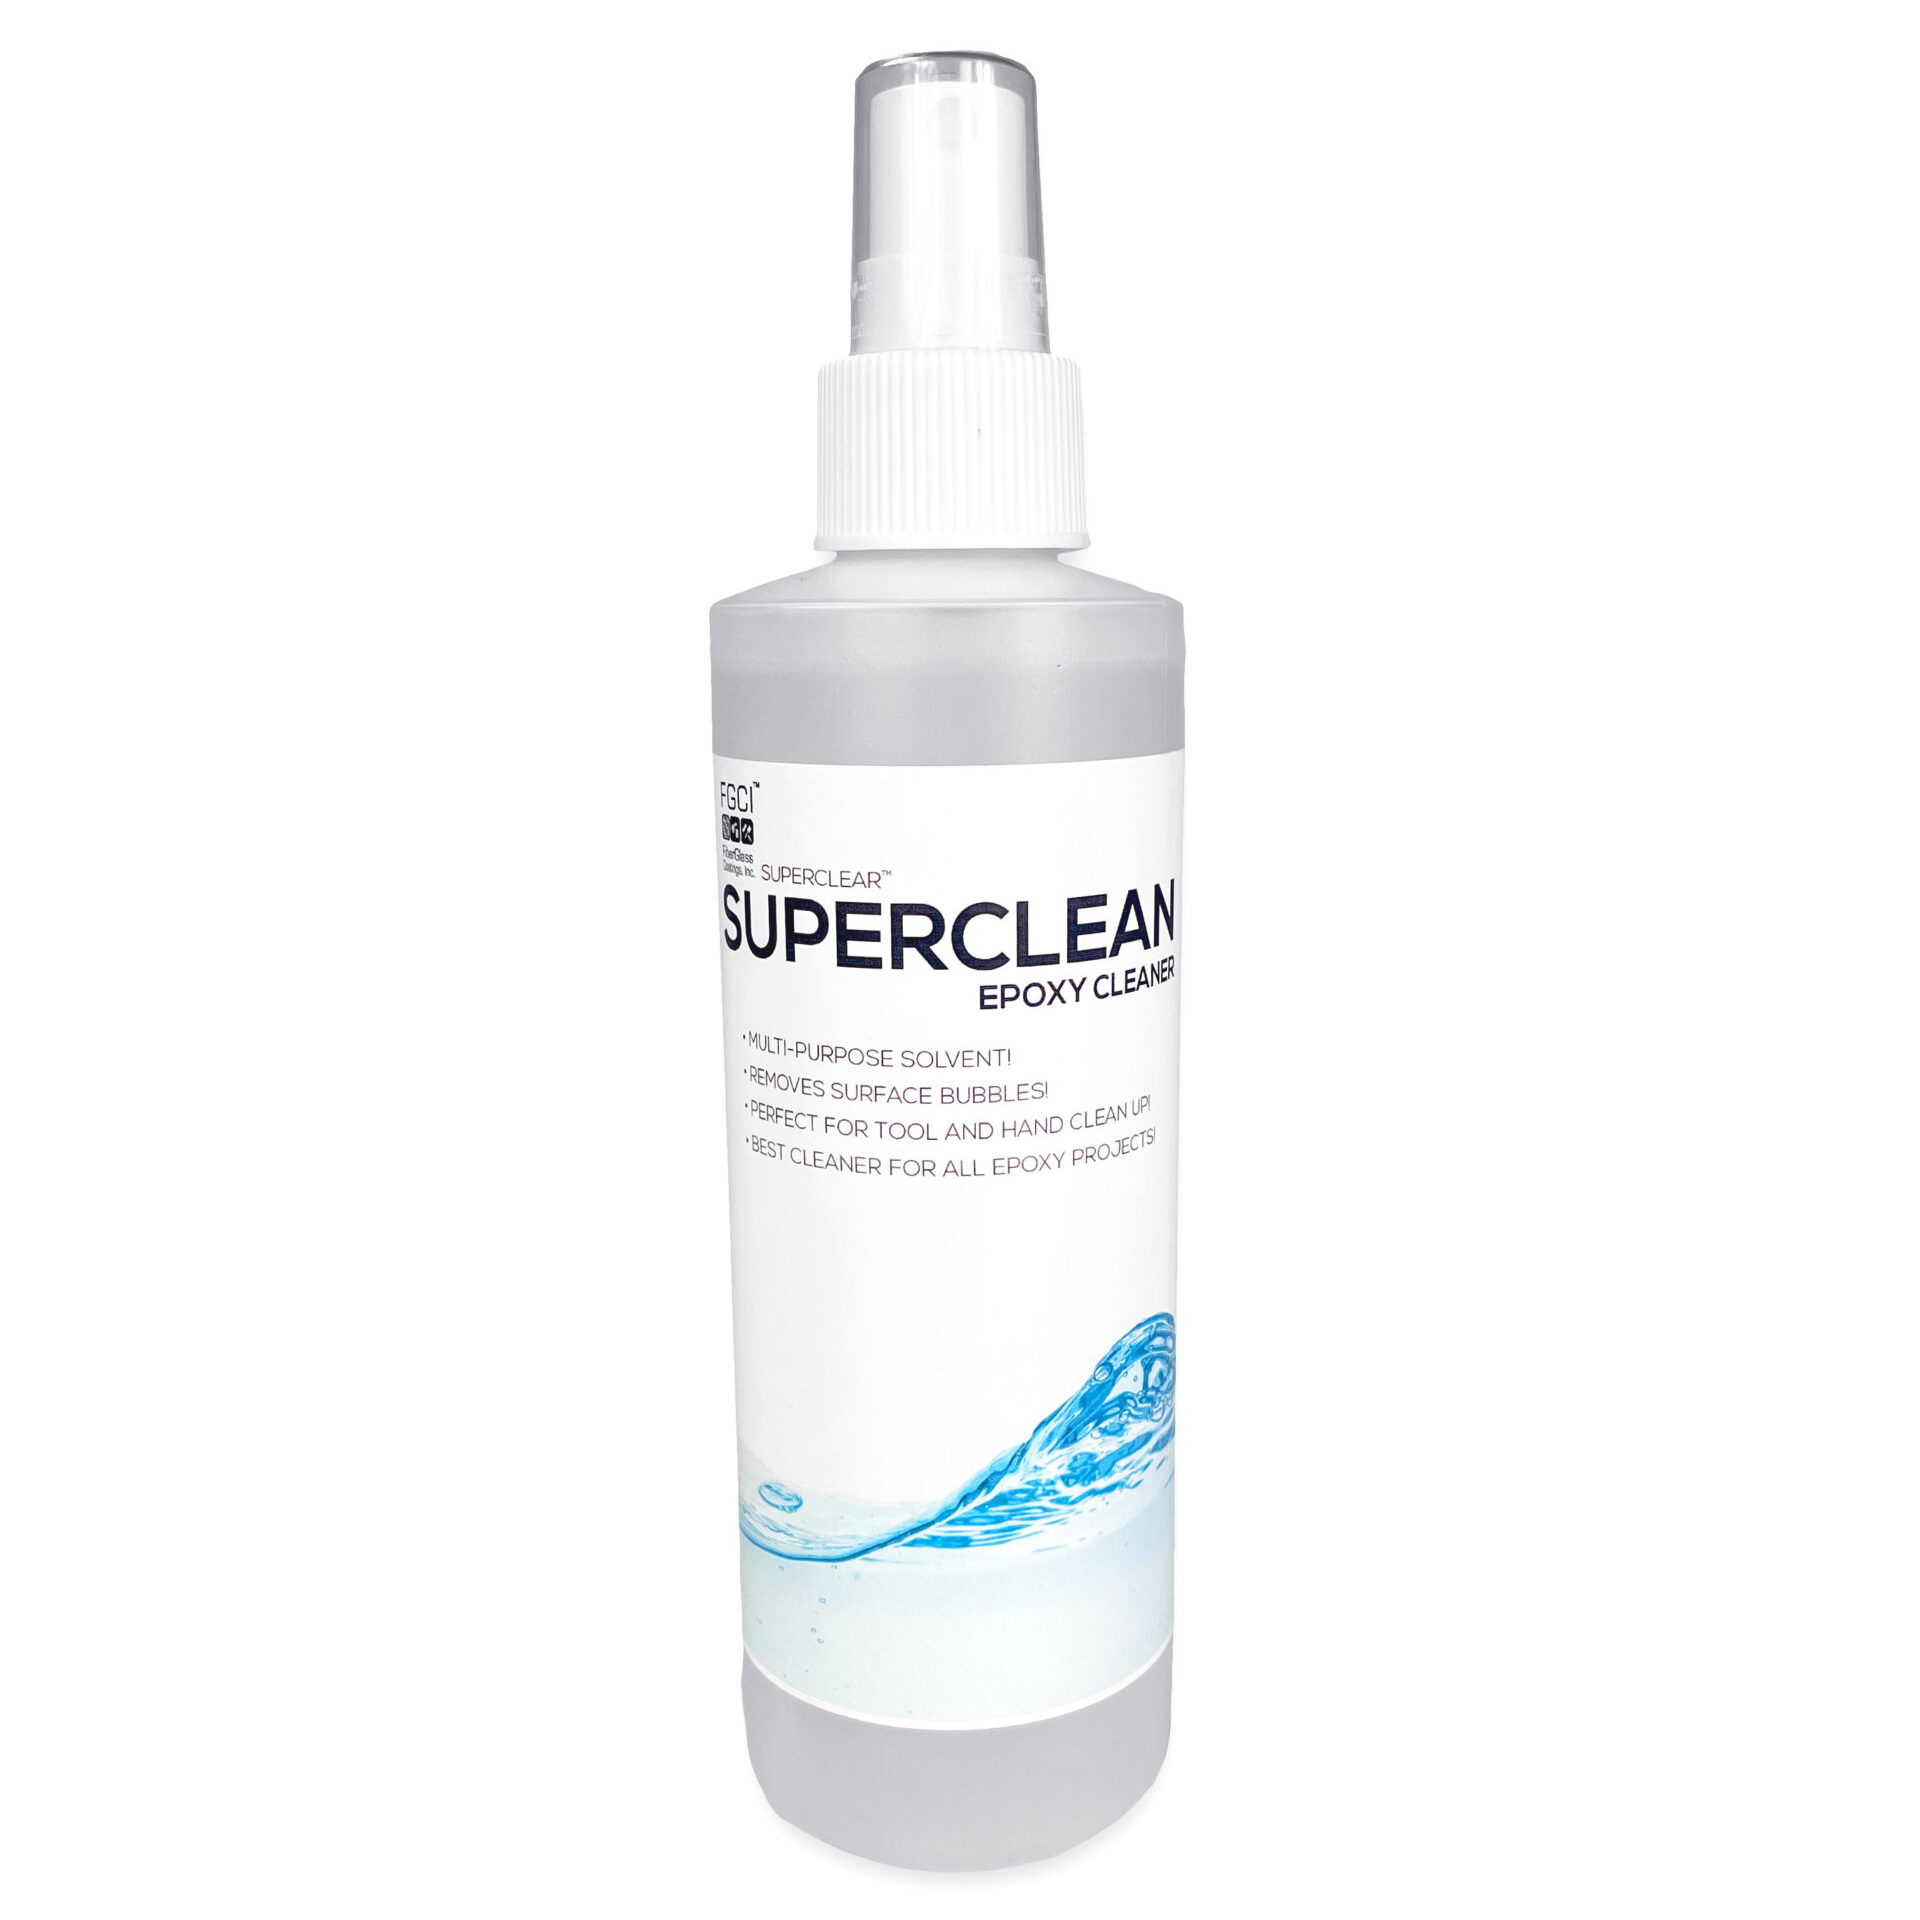 SuperClean Epoxy Cleaner 8oz. Bottle - Superclear Epoxy Resin Systems